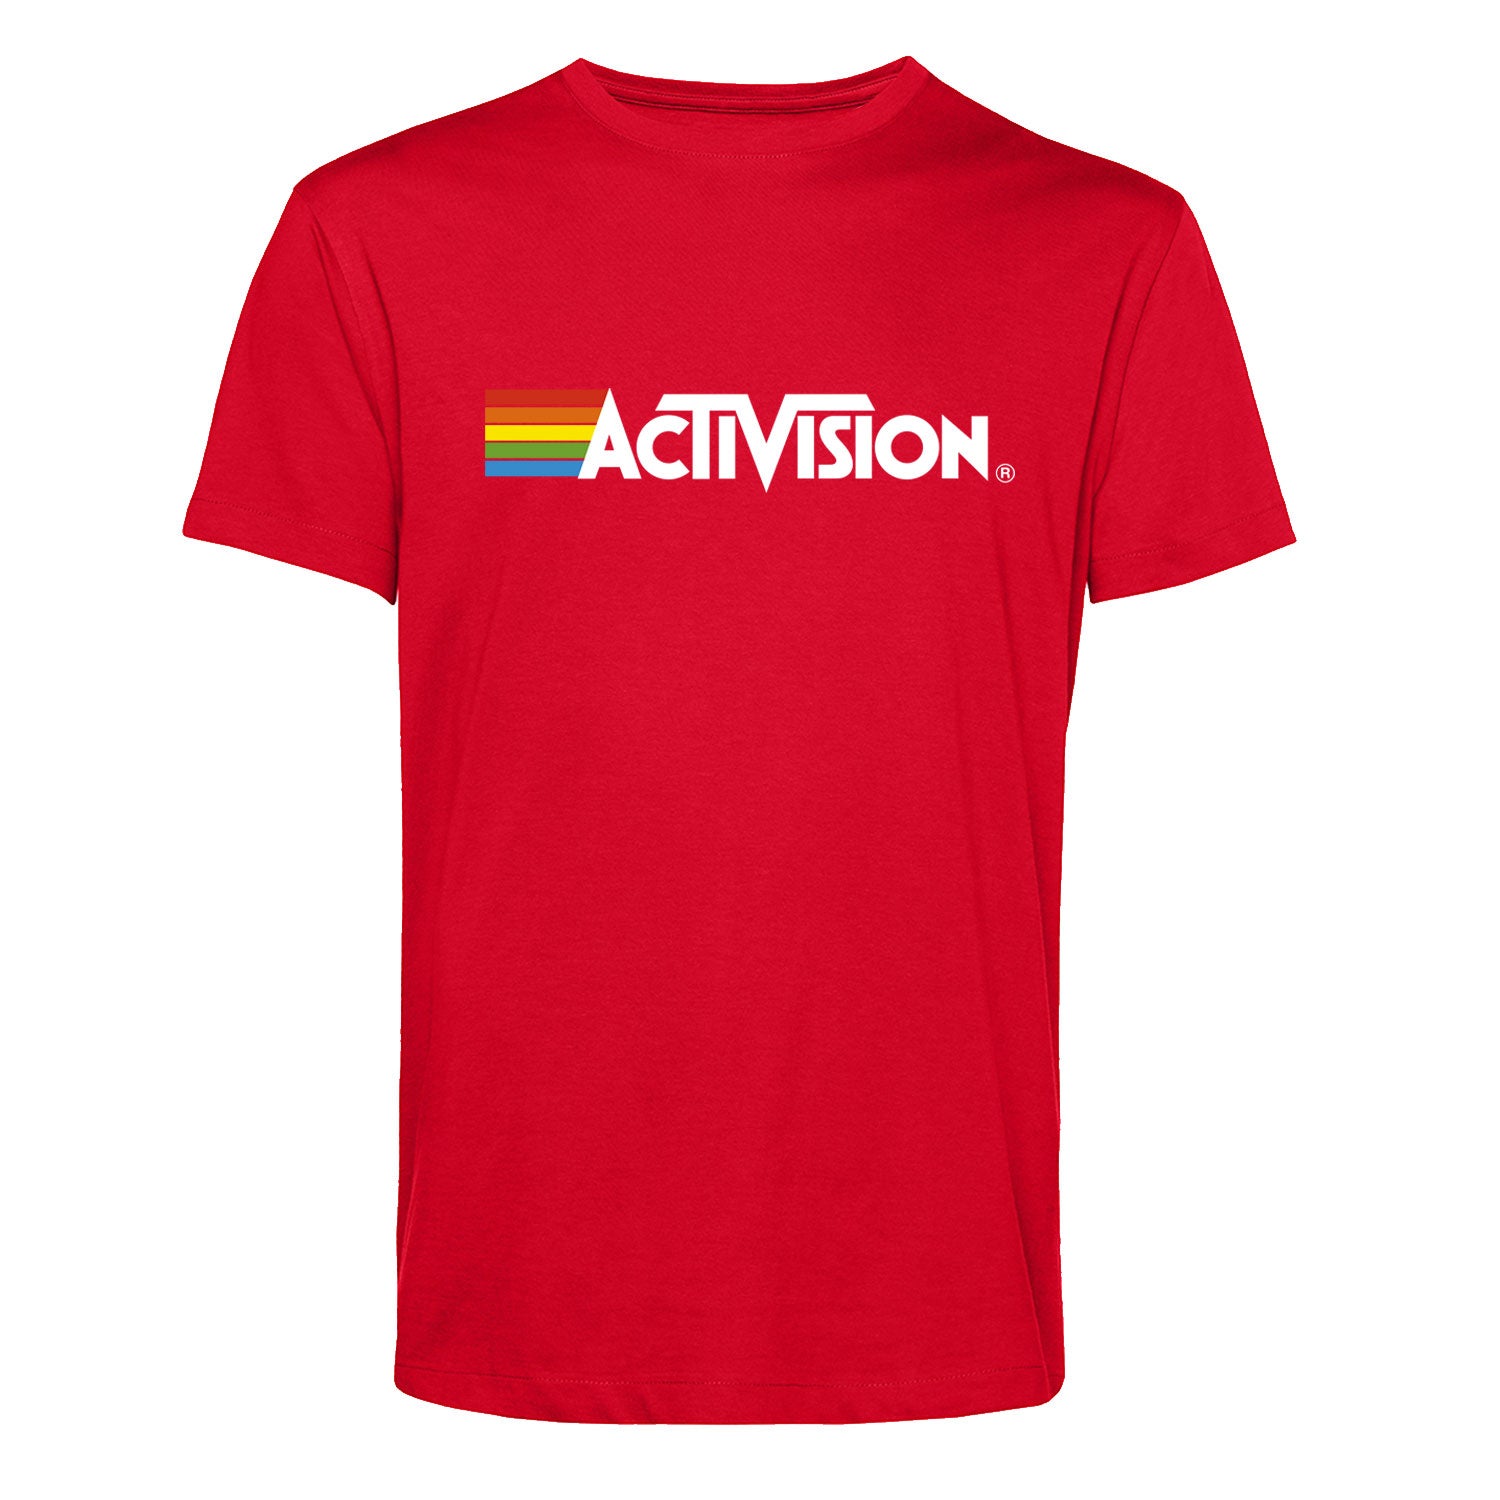 Activision Men's T-Shirt, Red Unisex Style